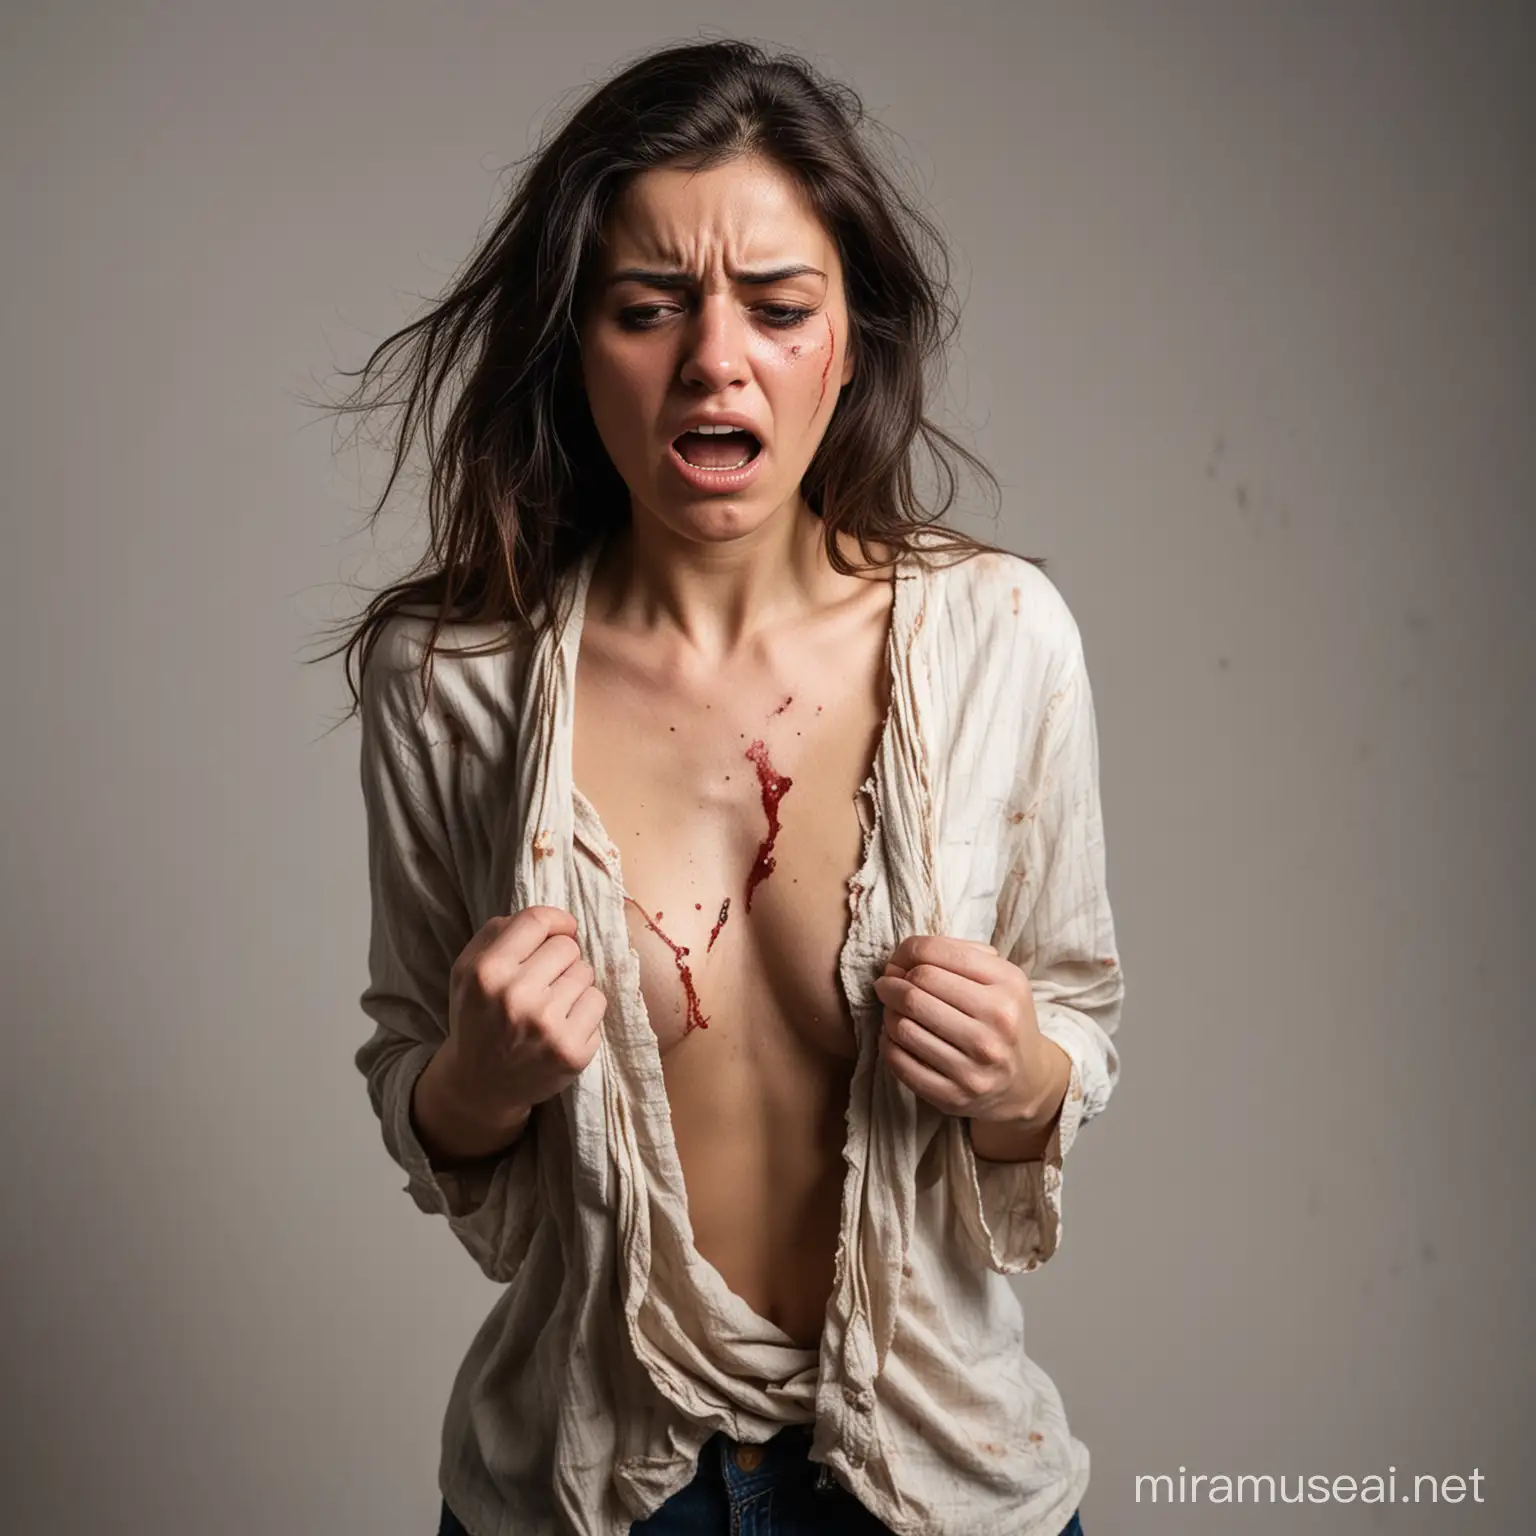 A frightened woman with torn clothes, her face and bruises on her body, who was subjected to sexual harassment and violence.